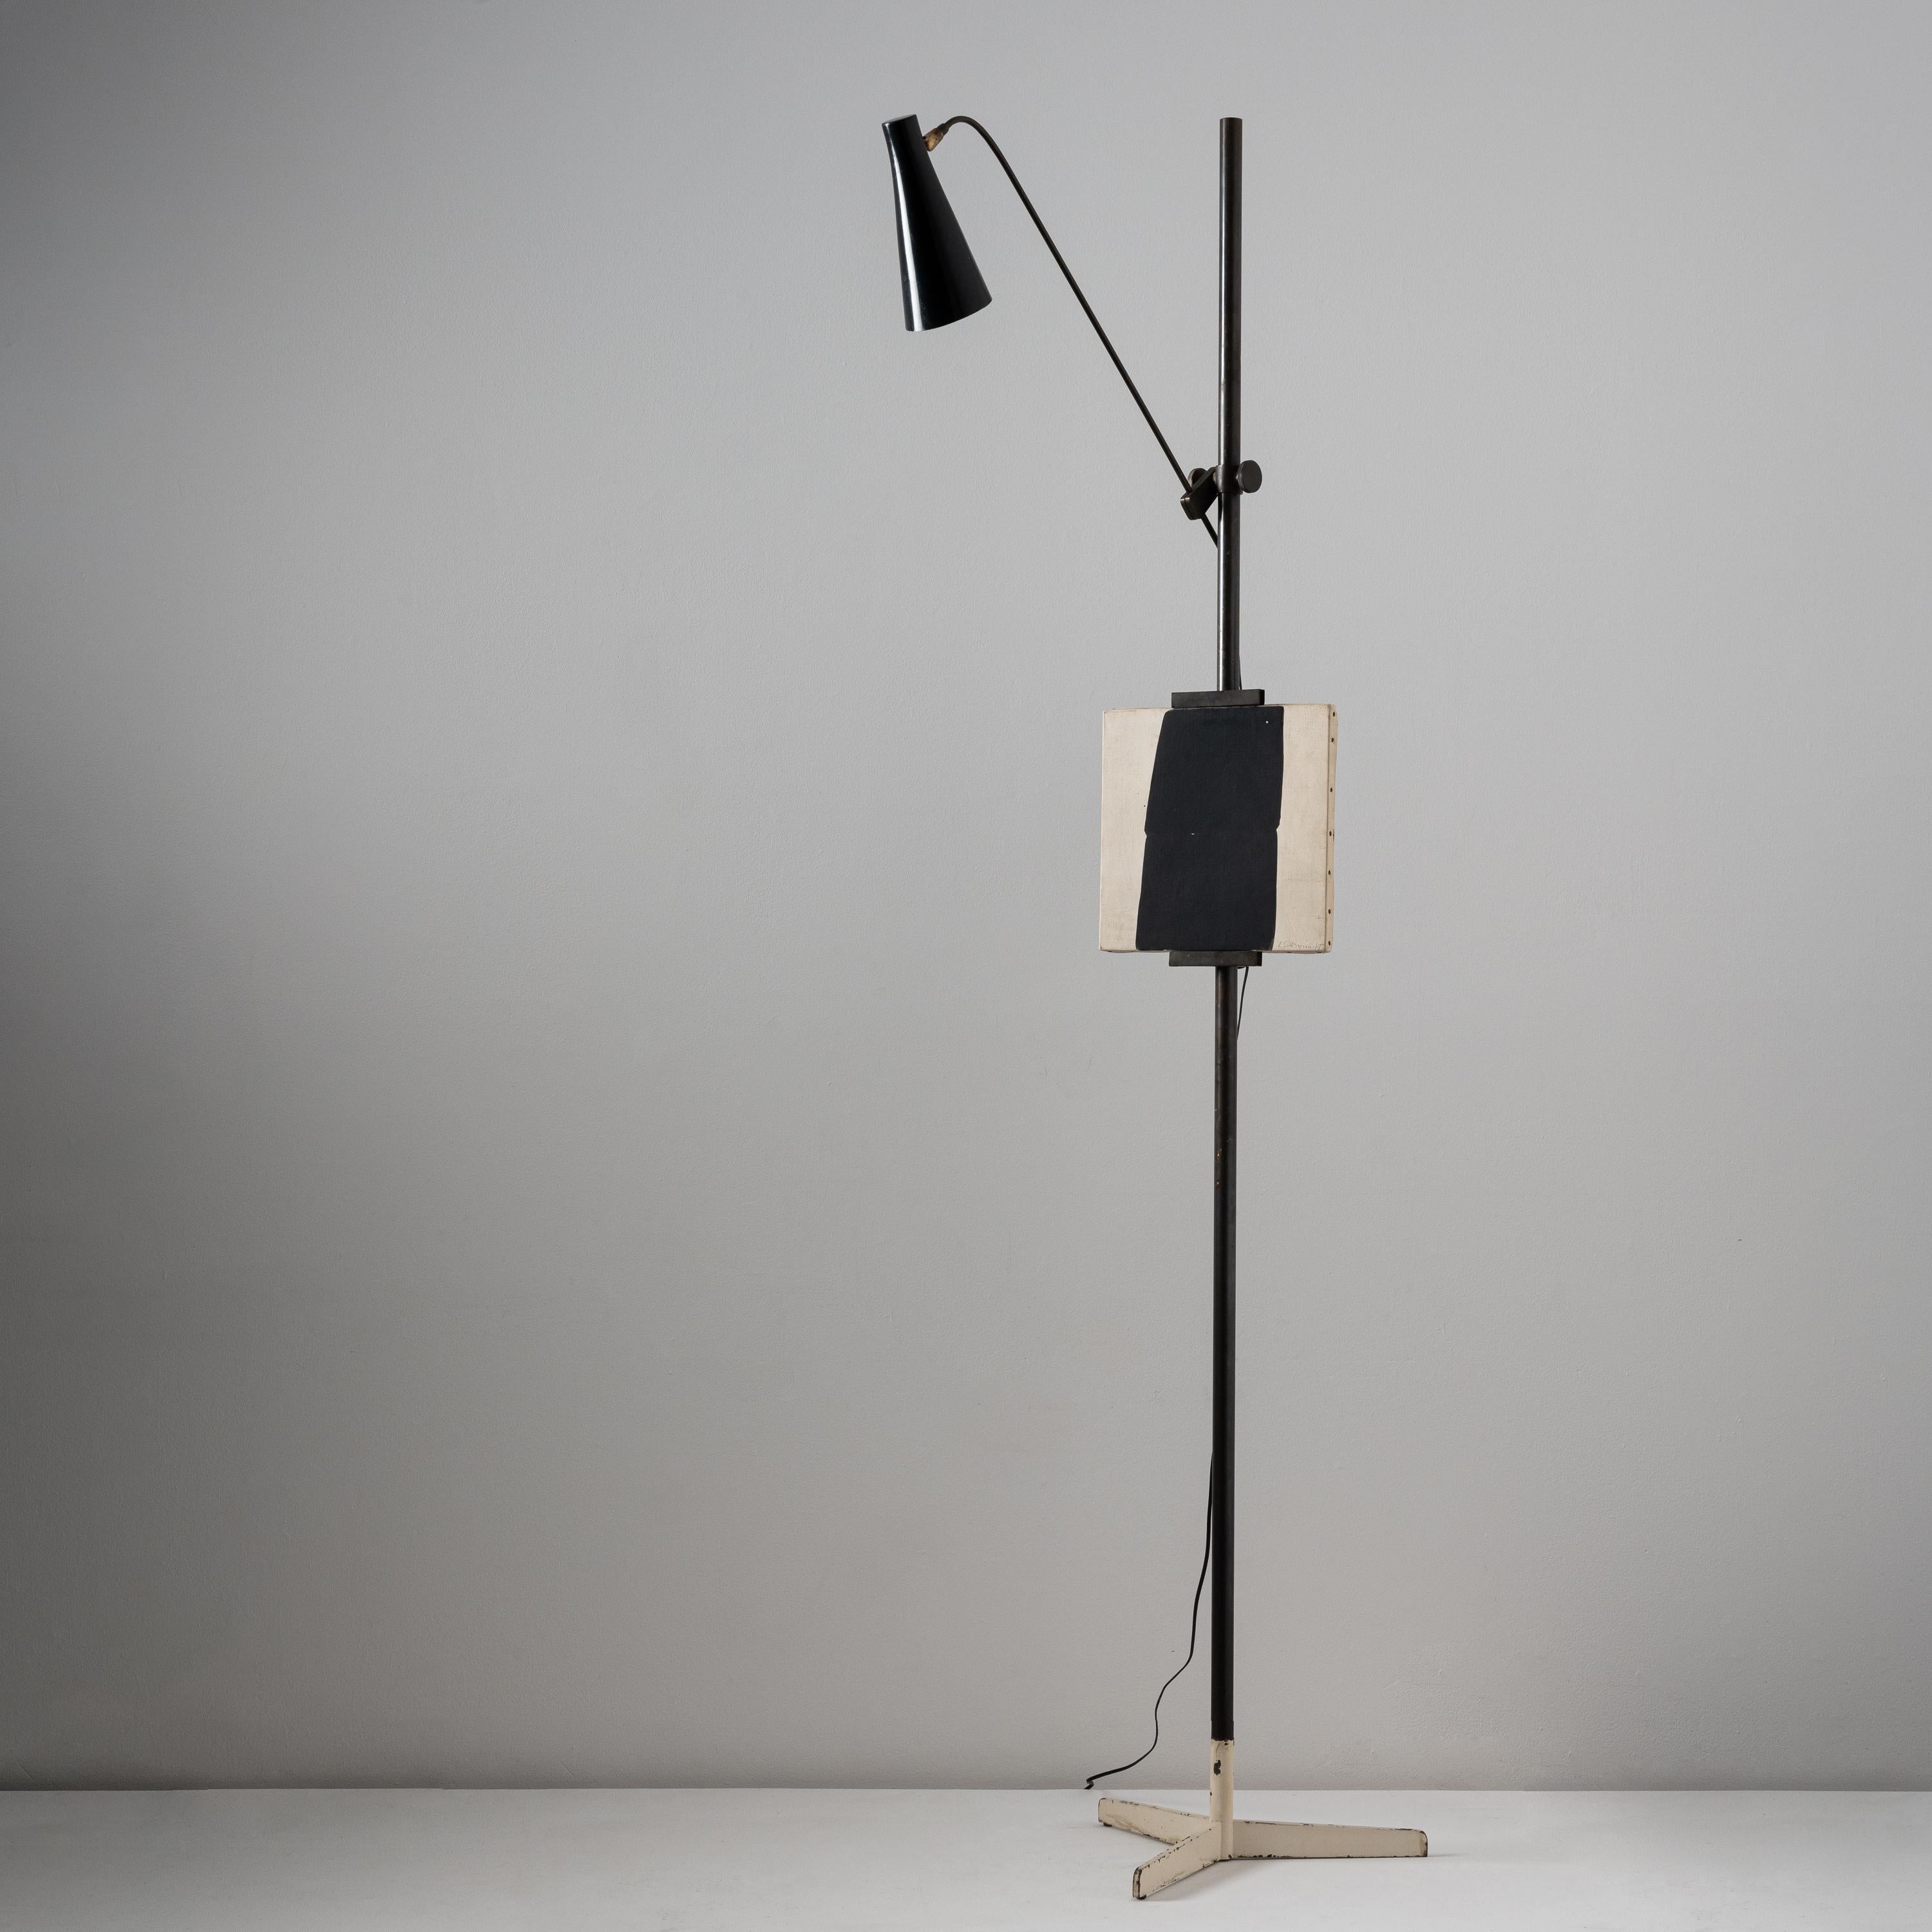 Rare and Important Easel lamp by Oluce. Designed and manufactured in Italy, circa 1950's. Adjust to various height and positions. Metal, brass. Original EU cord. We recommend one E27 60w maximum bulb. Bulb not included.